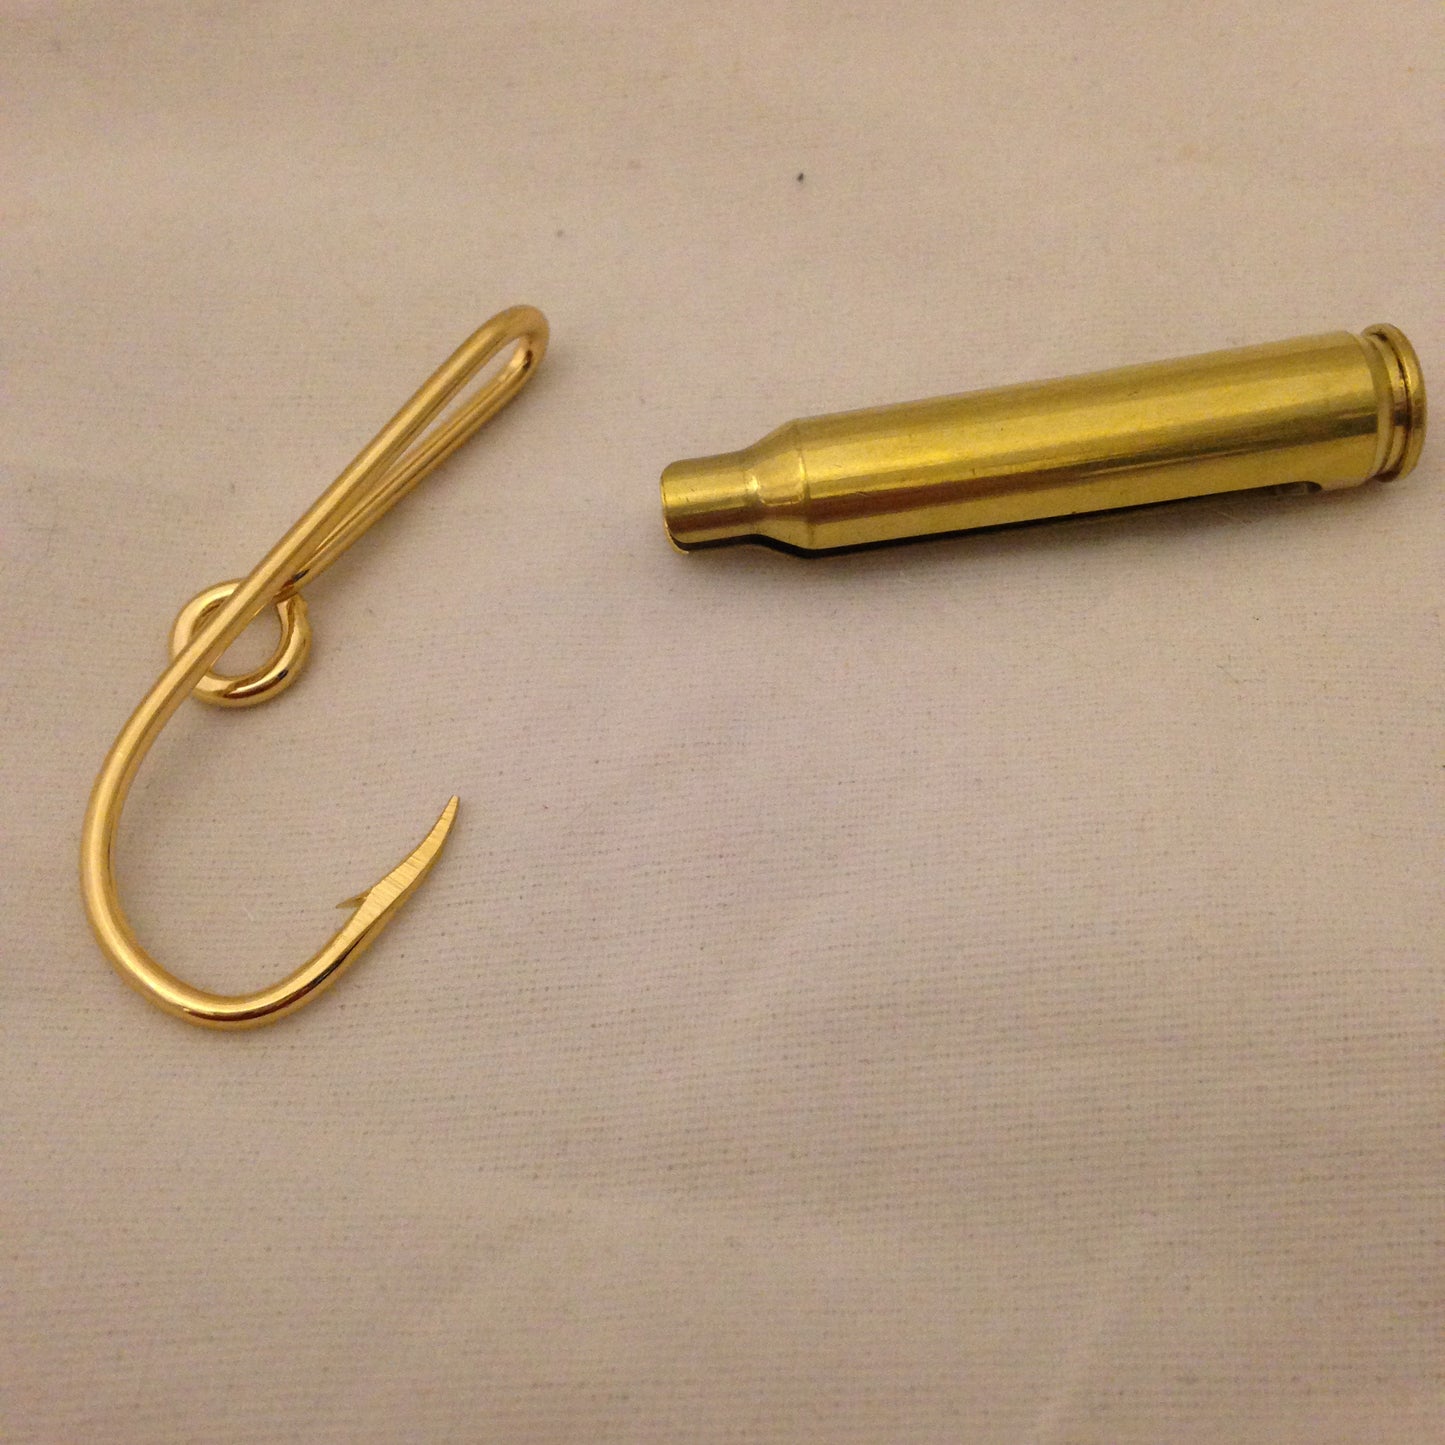 Blast and Cast Fish Hook and Real Bullet Hat Clip Set (2 Clips)